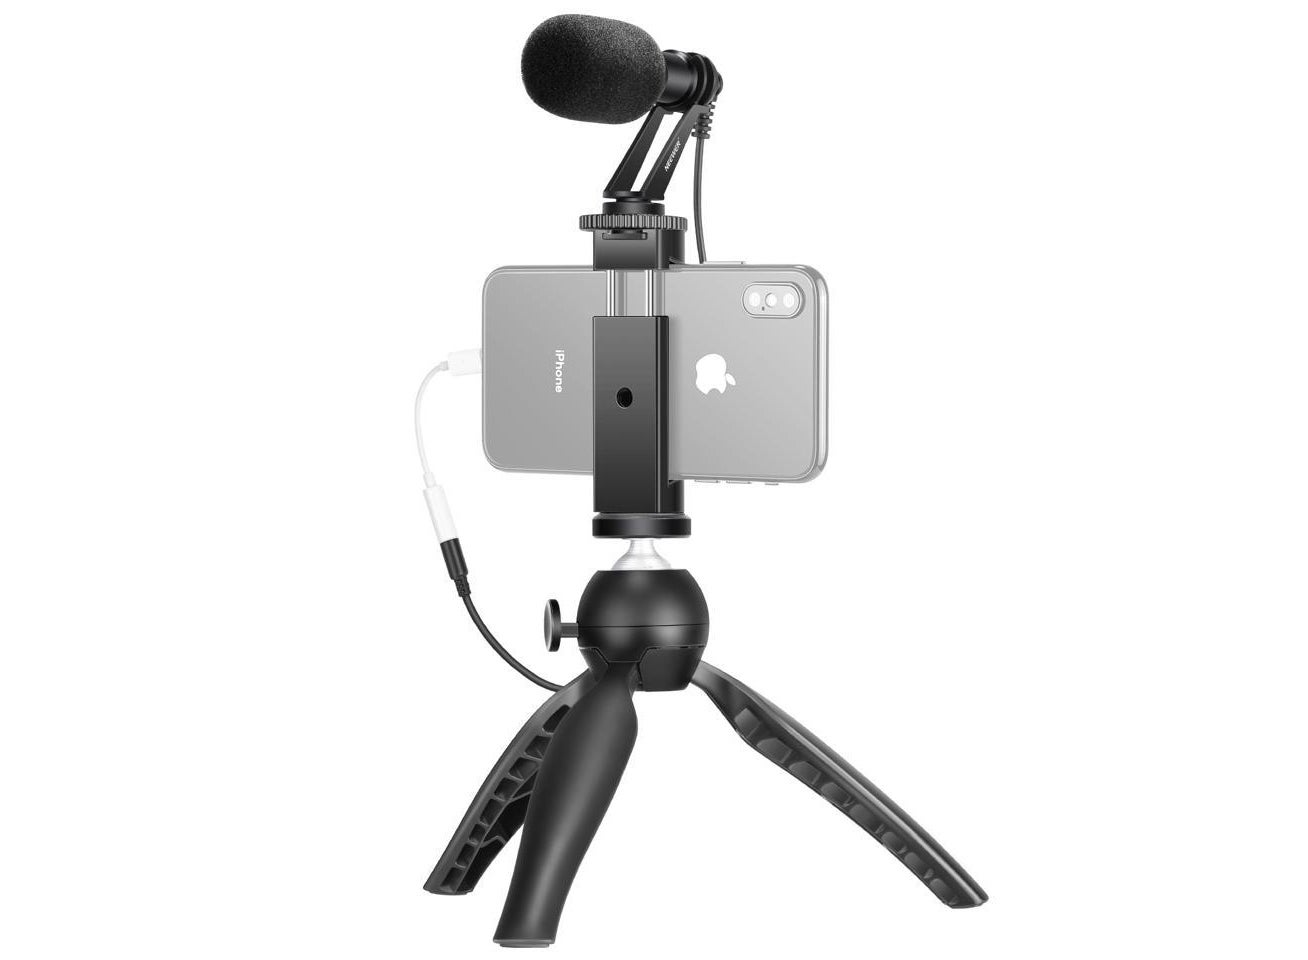 Best phone tripods for video calls, vlogging, or live streaming - updated February 2022